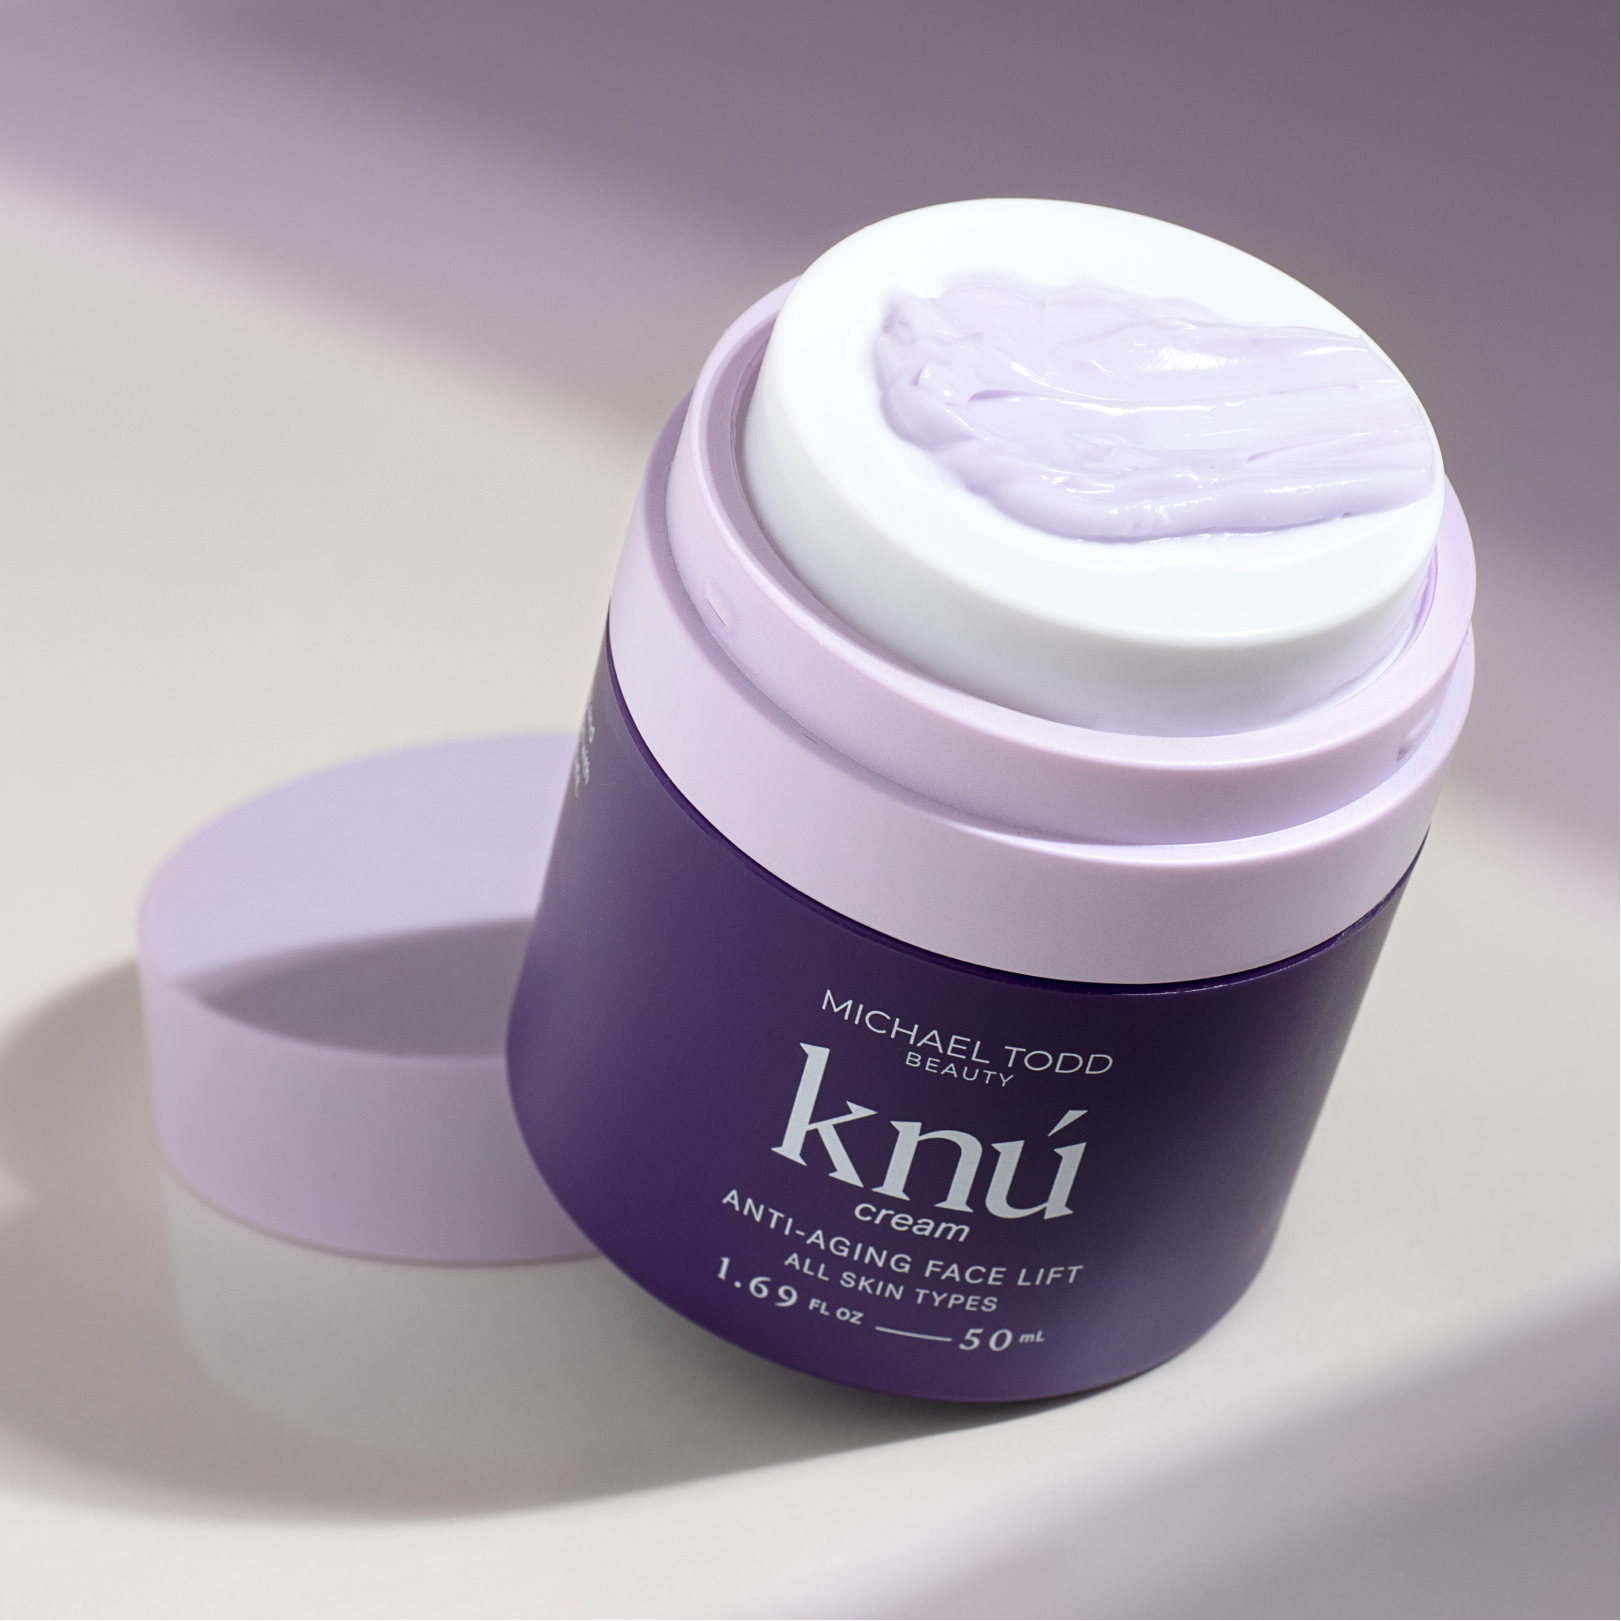 A jar of rejuvenating Knú Ageless Duo cream from Michael Todd Beauty sits on a white surface.